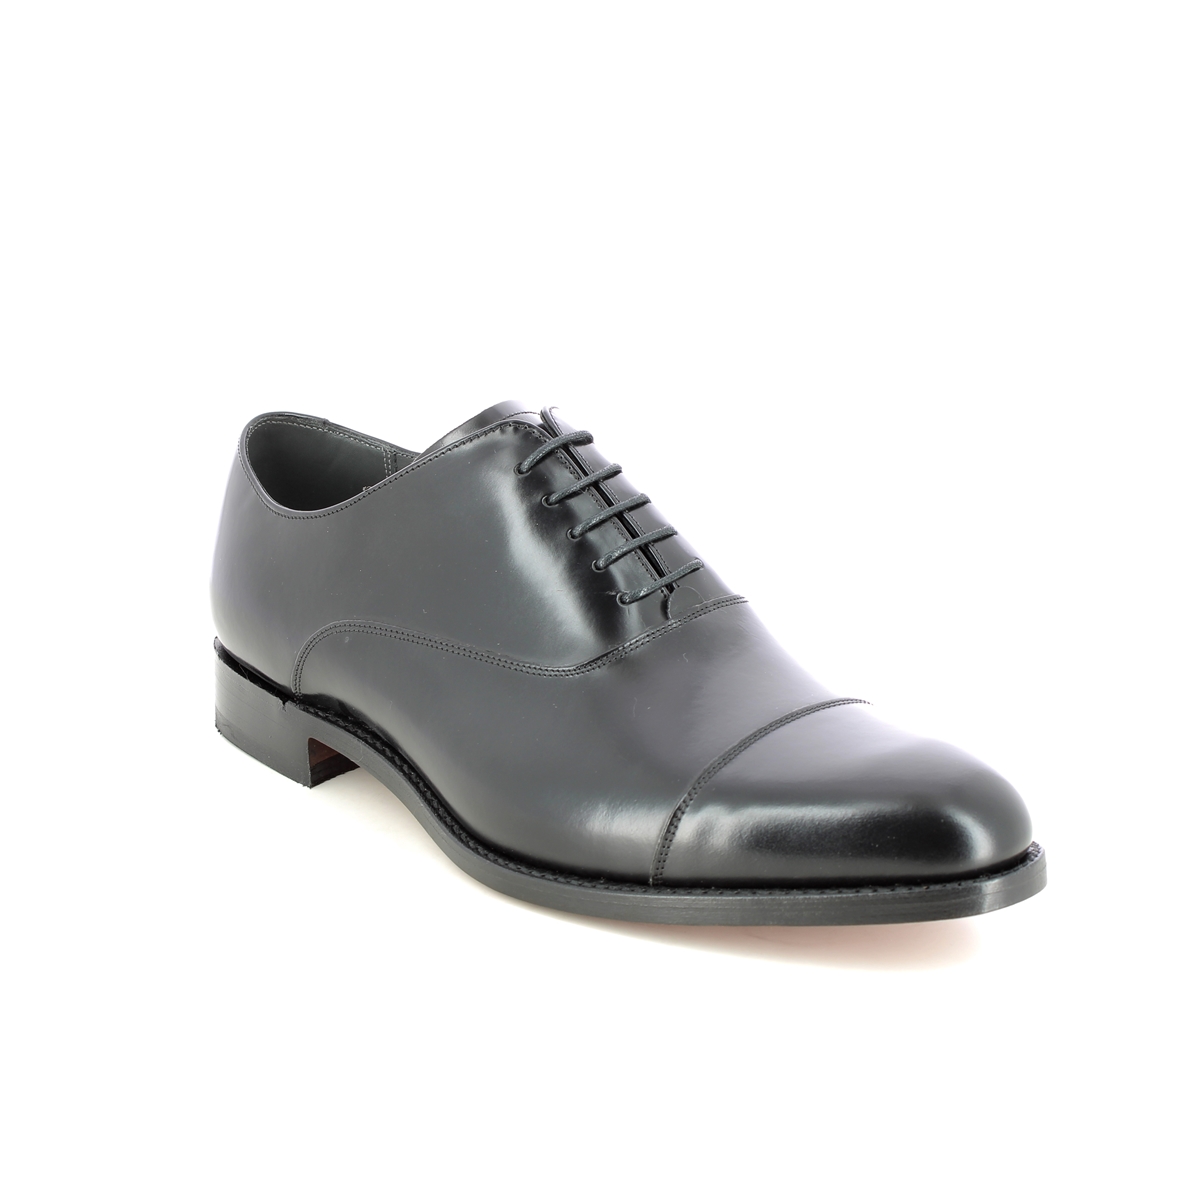 Barker Winsford Cap Black leather Mens formal shoes 3945-17G in a Plain Leather in Size 7